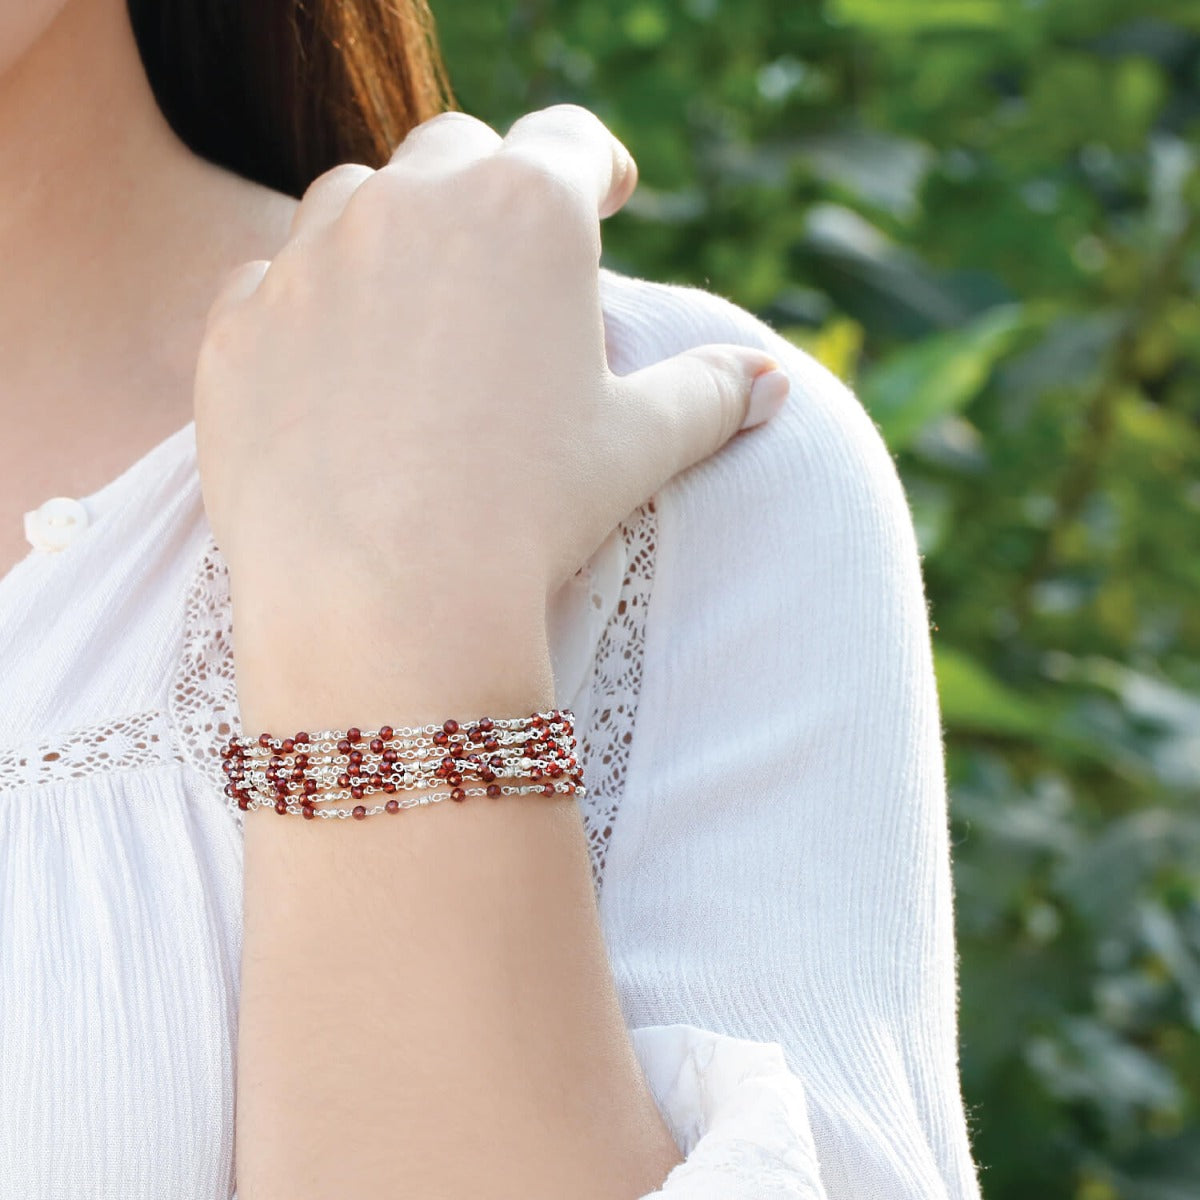 Magnificent Garnet Beads and Silver 925 Bracelet